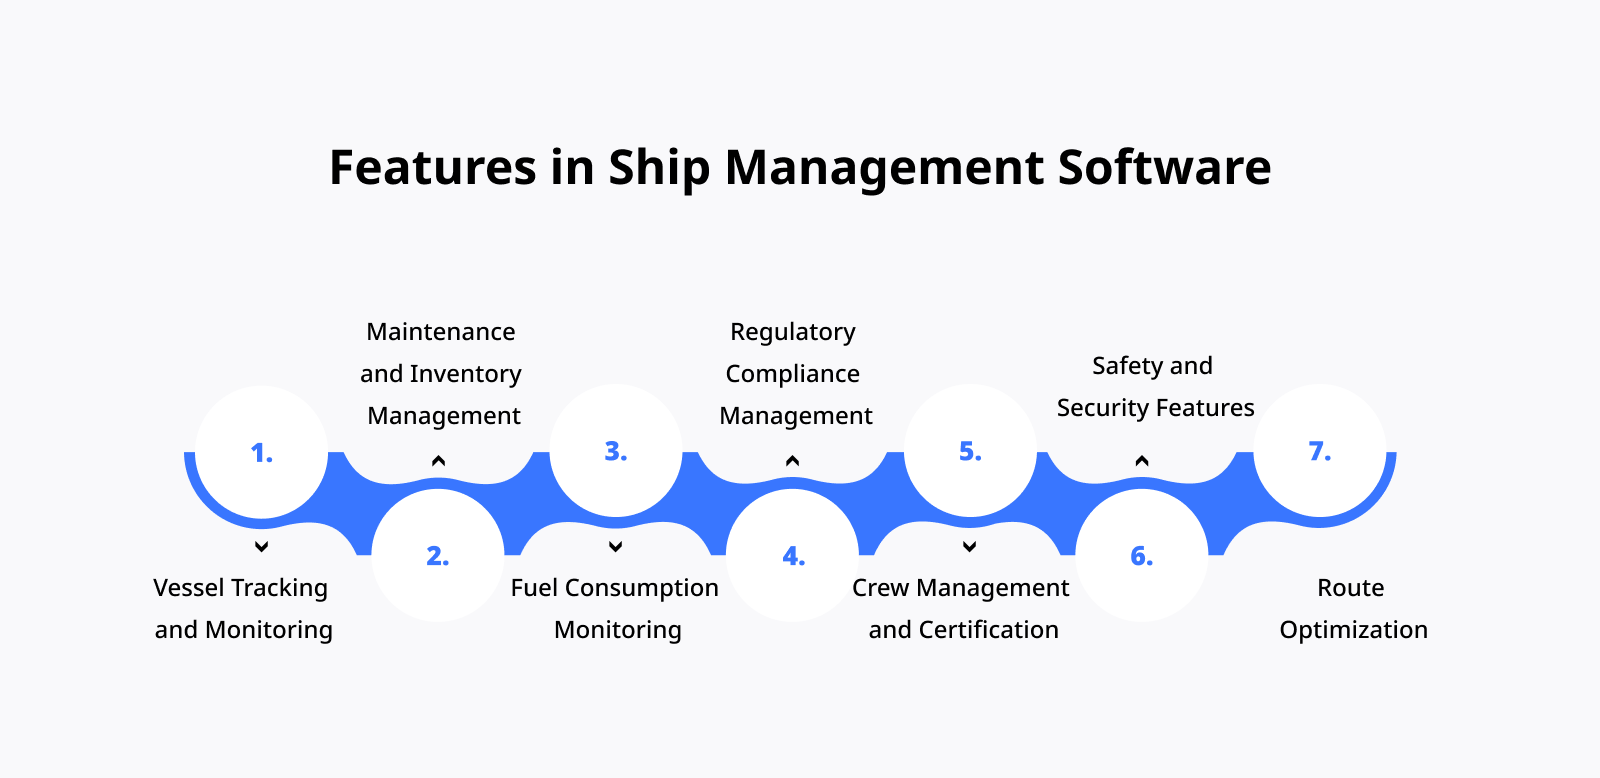 Features in Ship Management Software